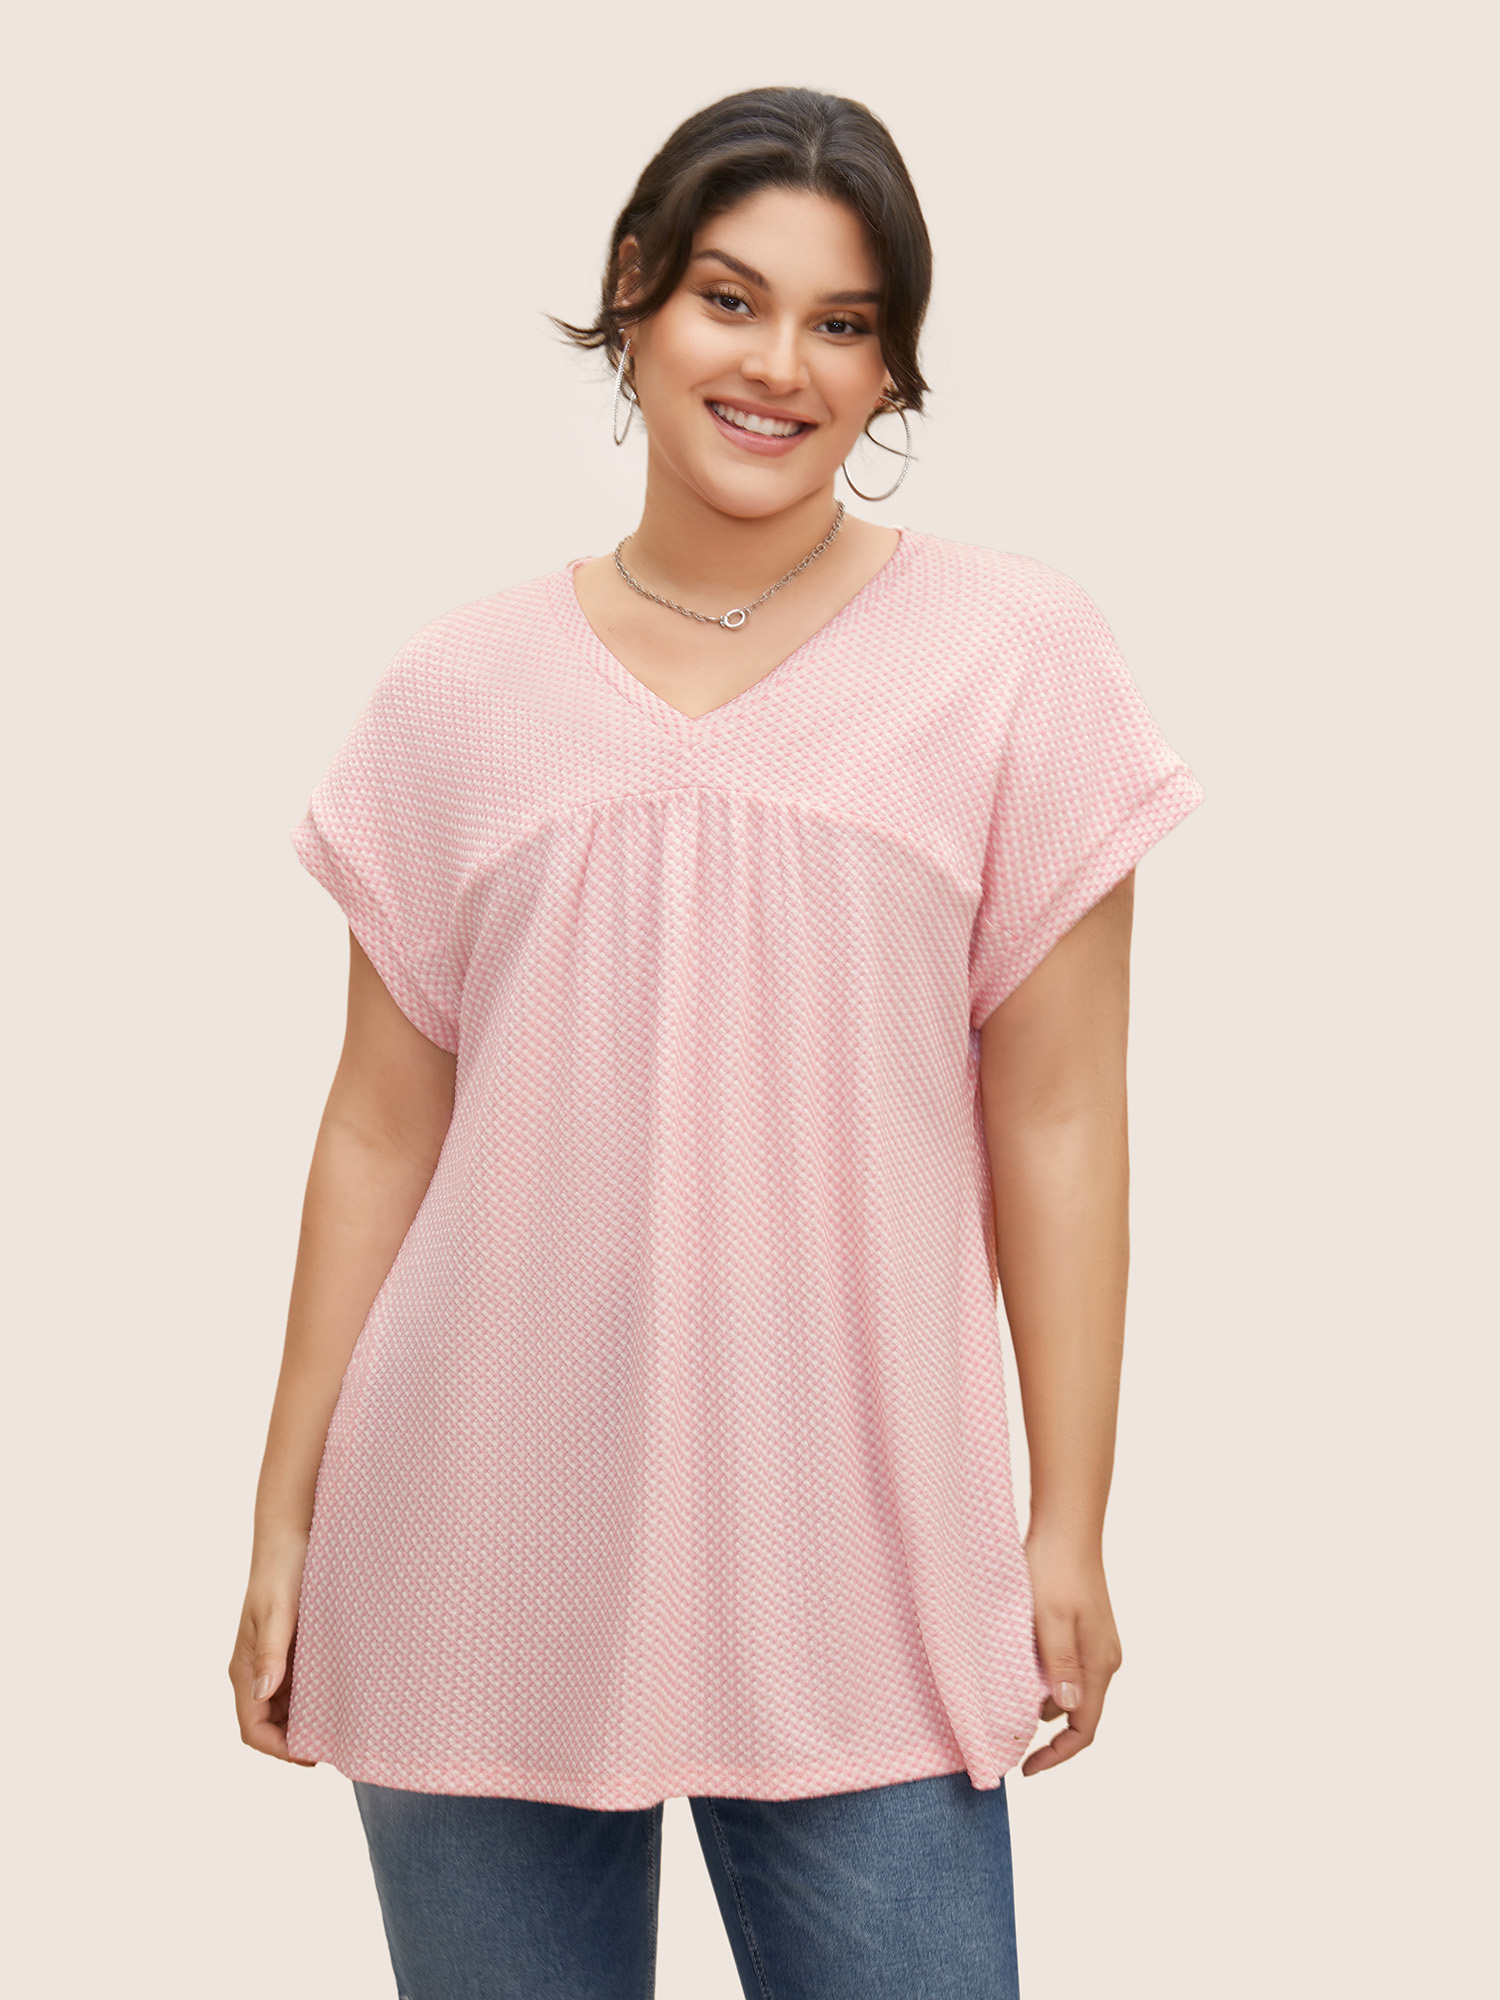 

Plus Size V Neck Plain Textured Batwing Sleeve T-shirt Blush Women Casual Texture V-neck Everyday T-shirts BloomChic